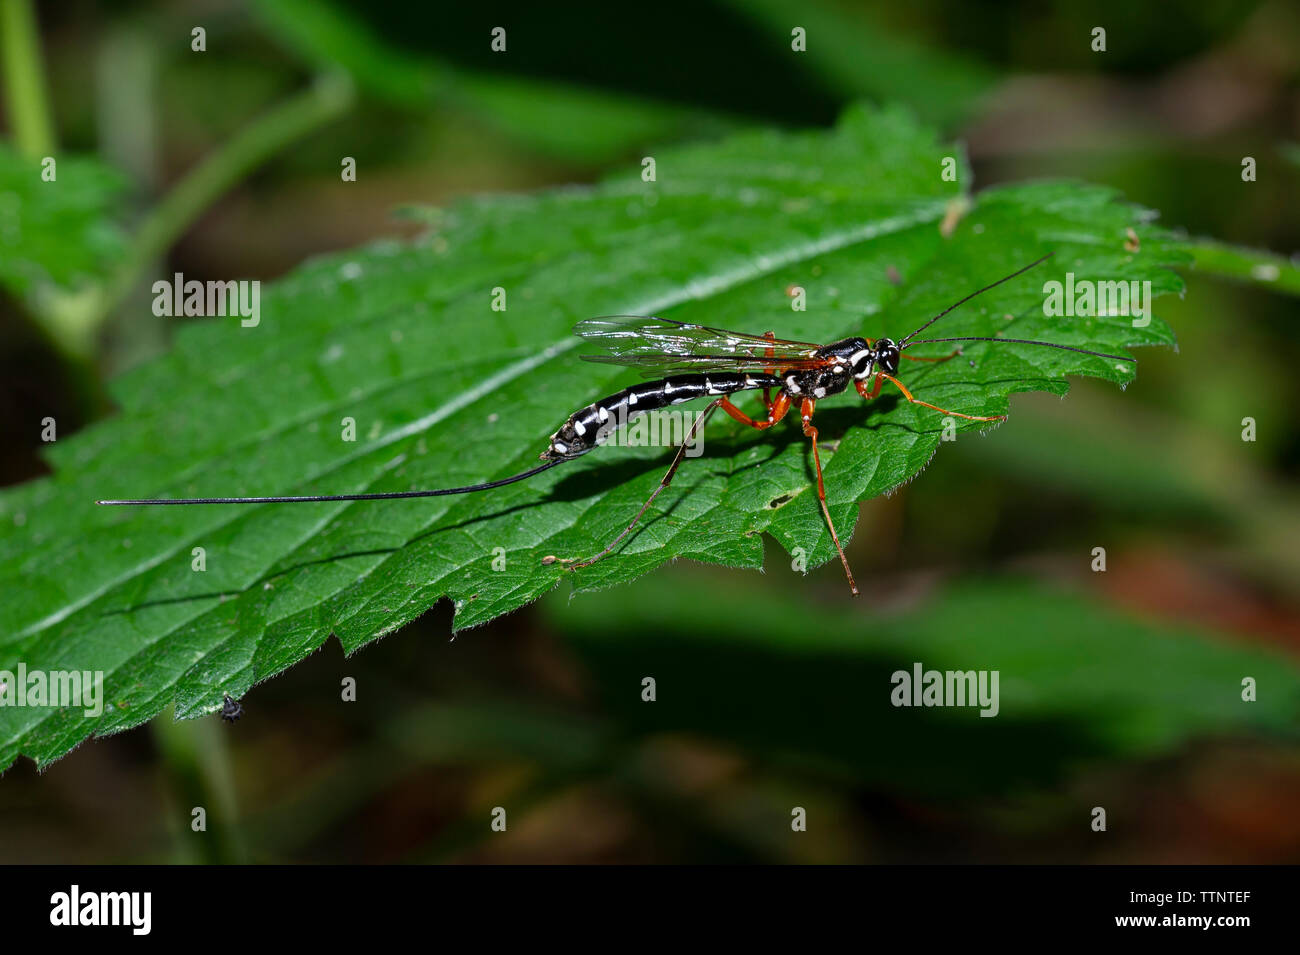 A Giant Ichneumon or Sabre Wasp (Rhyssa persuasoria) at Tophill Low Nature Reserve In East Yorkshire, UK Stock Photo